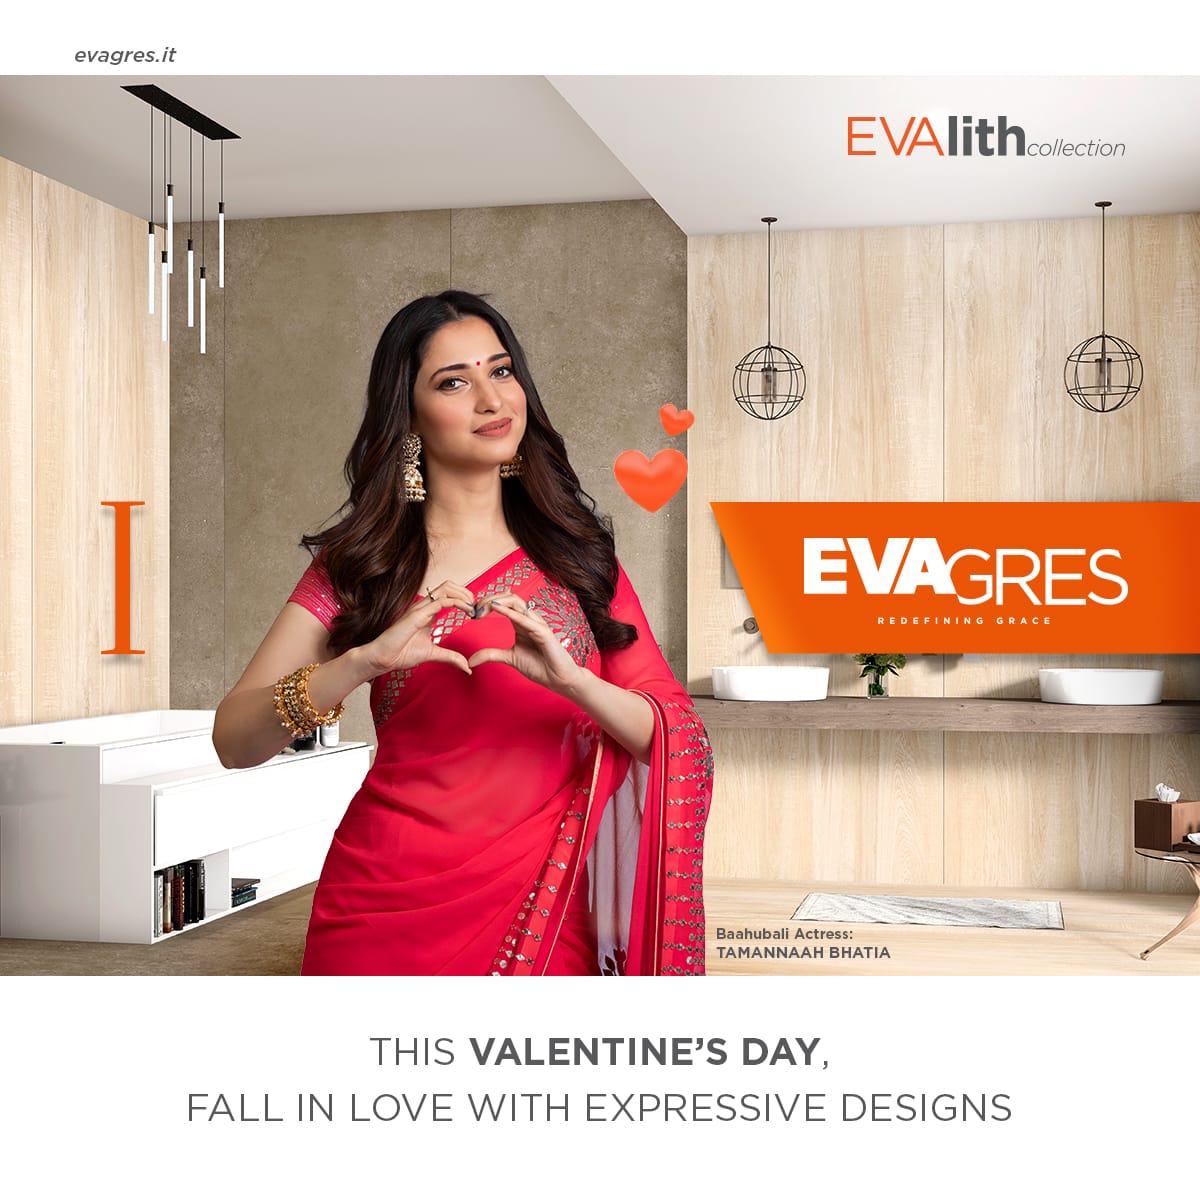 Designs that makes you fall in love at first sight, come & fall in love with EvaGres India. #HappyValentineDay @tamannaahspeaks #amazingdesigns #walltiles #luxuryhome #designers #architects #homedecor #interiors #productdesign #interiorarchitecture #interiordesigner